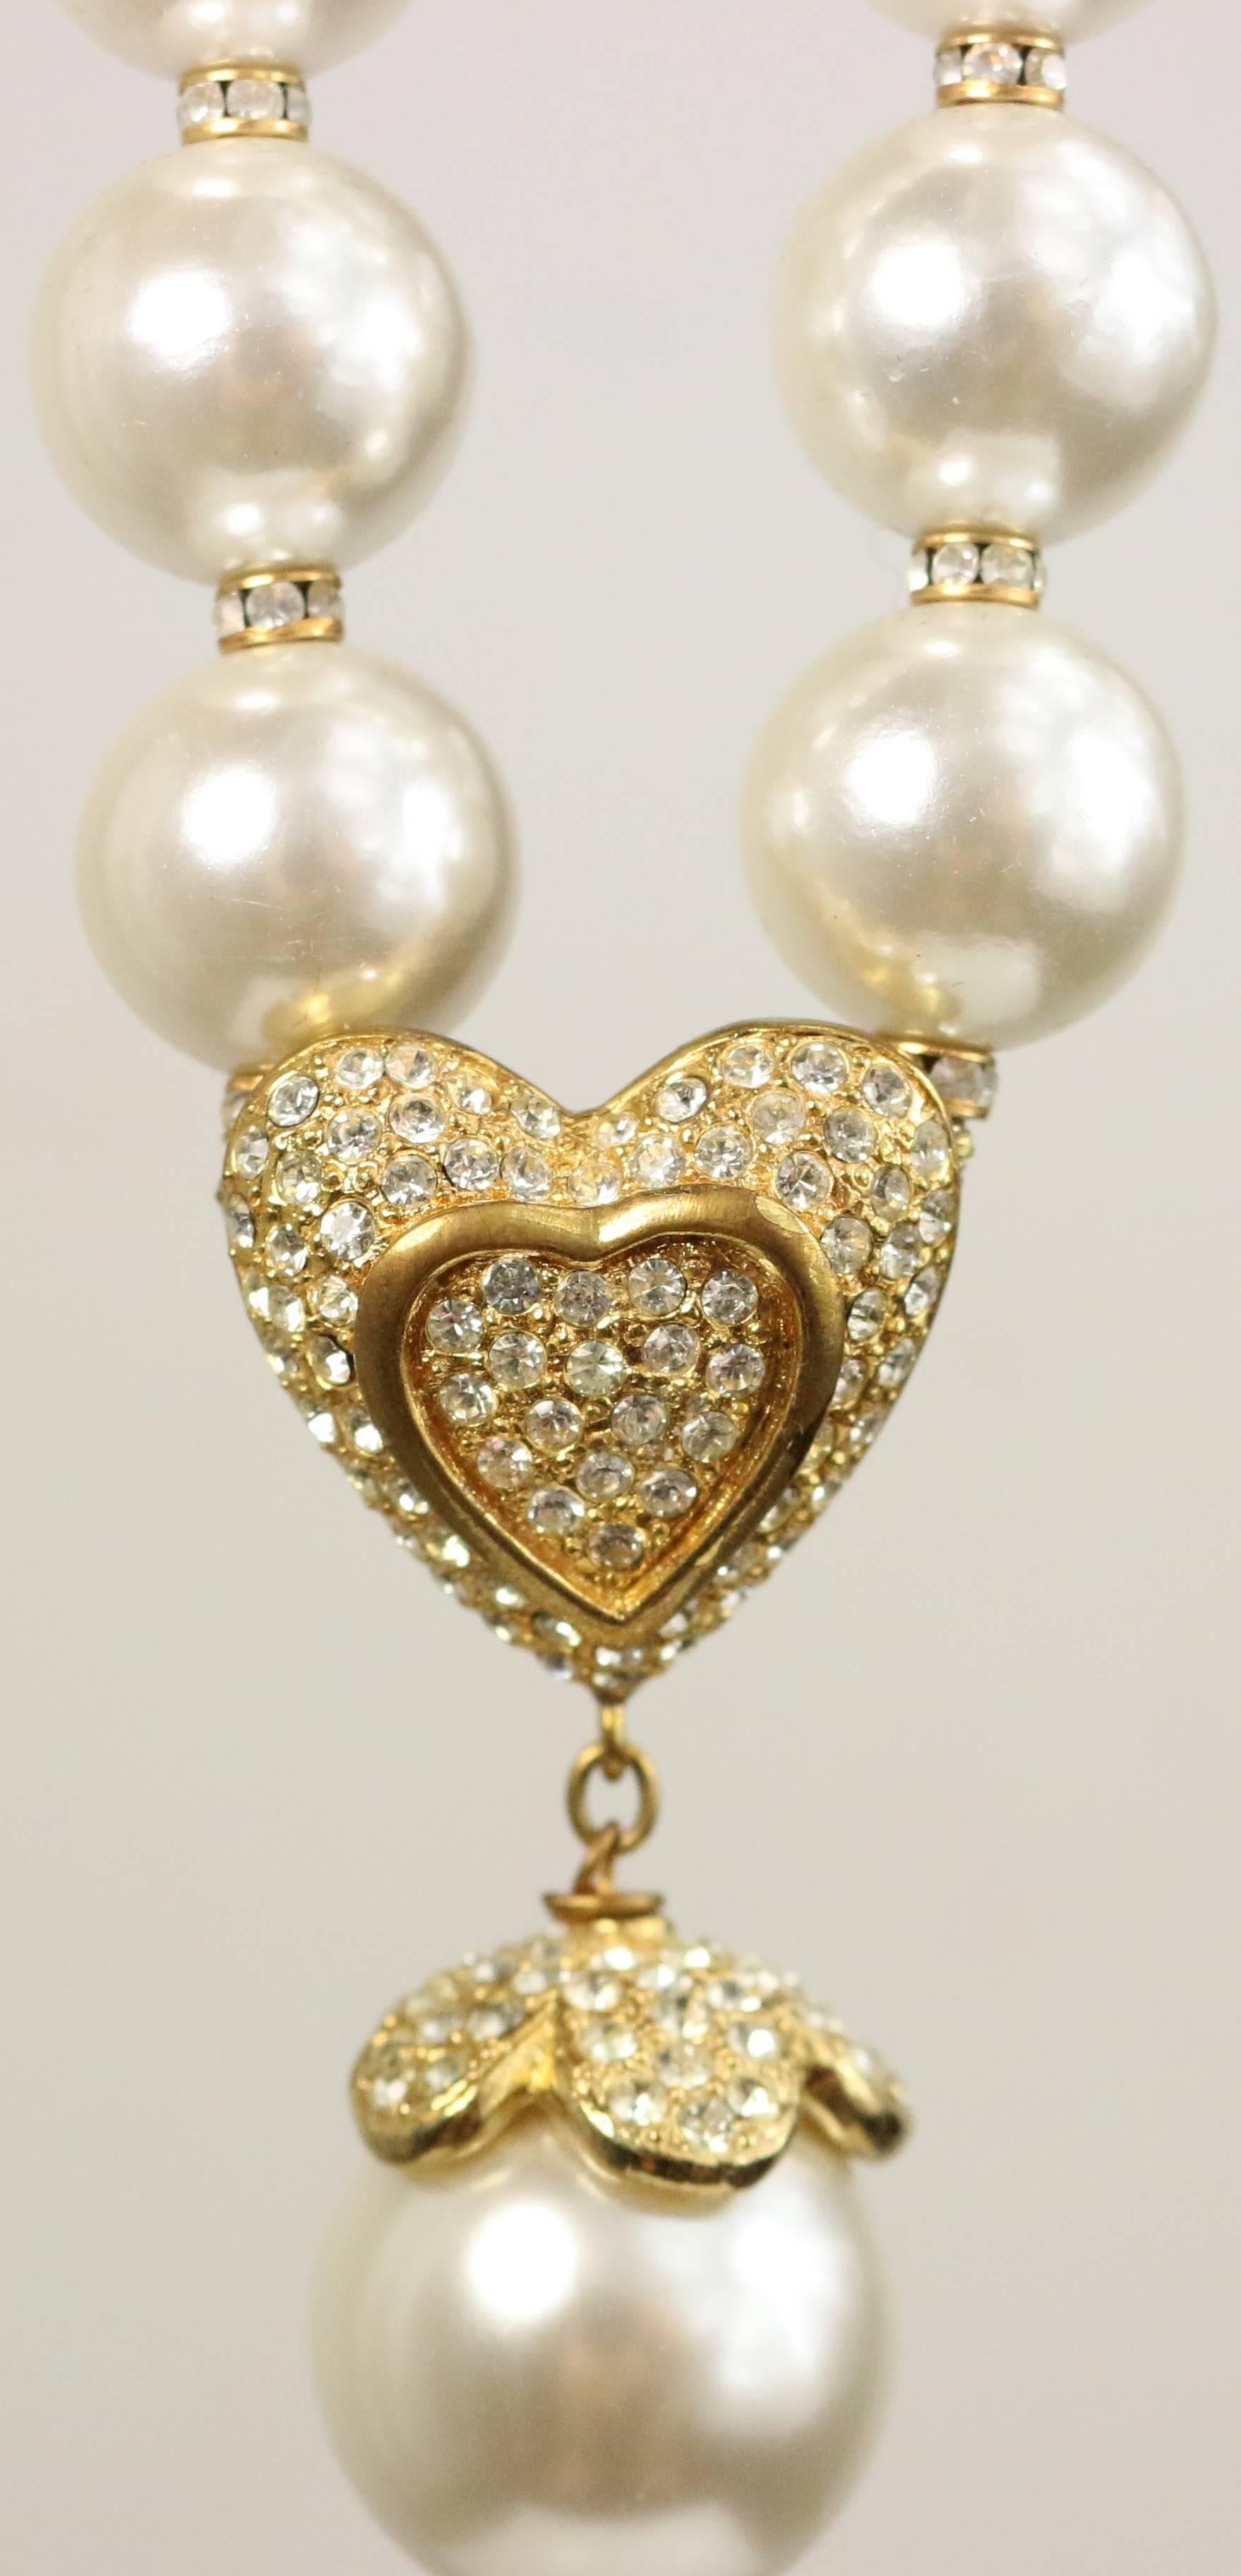 - Vintage 80s Escada gold toned rhinestone heart shaped and drop clover faux pearls necklace. 

- Length: 15 inches long. Height with the drop clover: 2 inches. 

